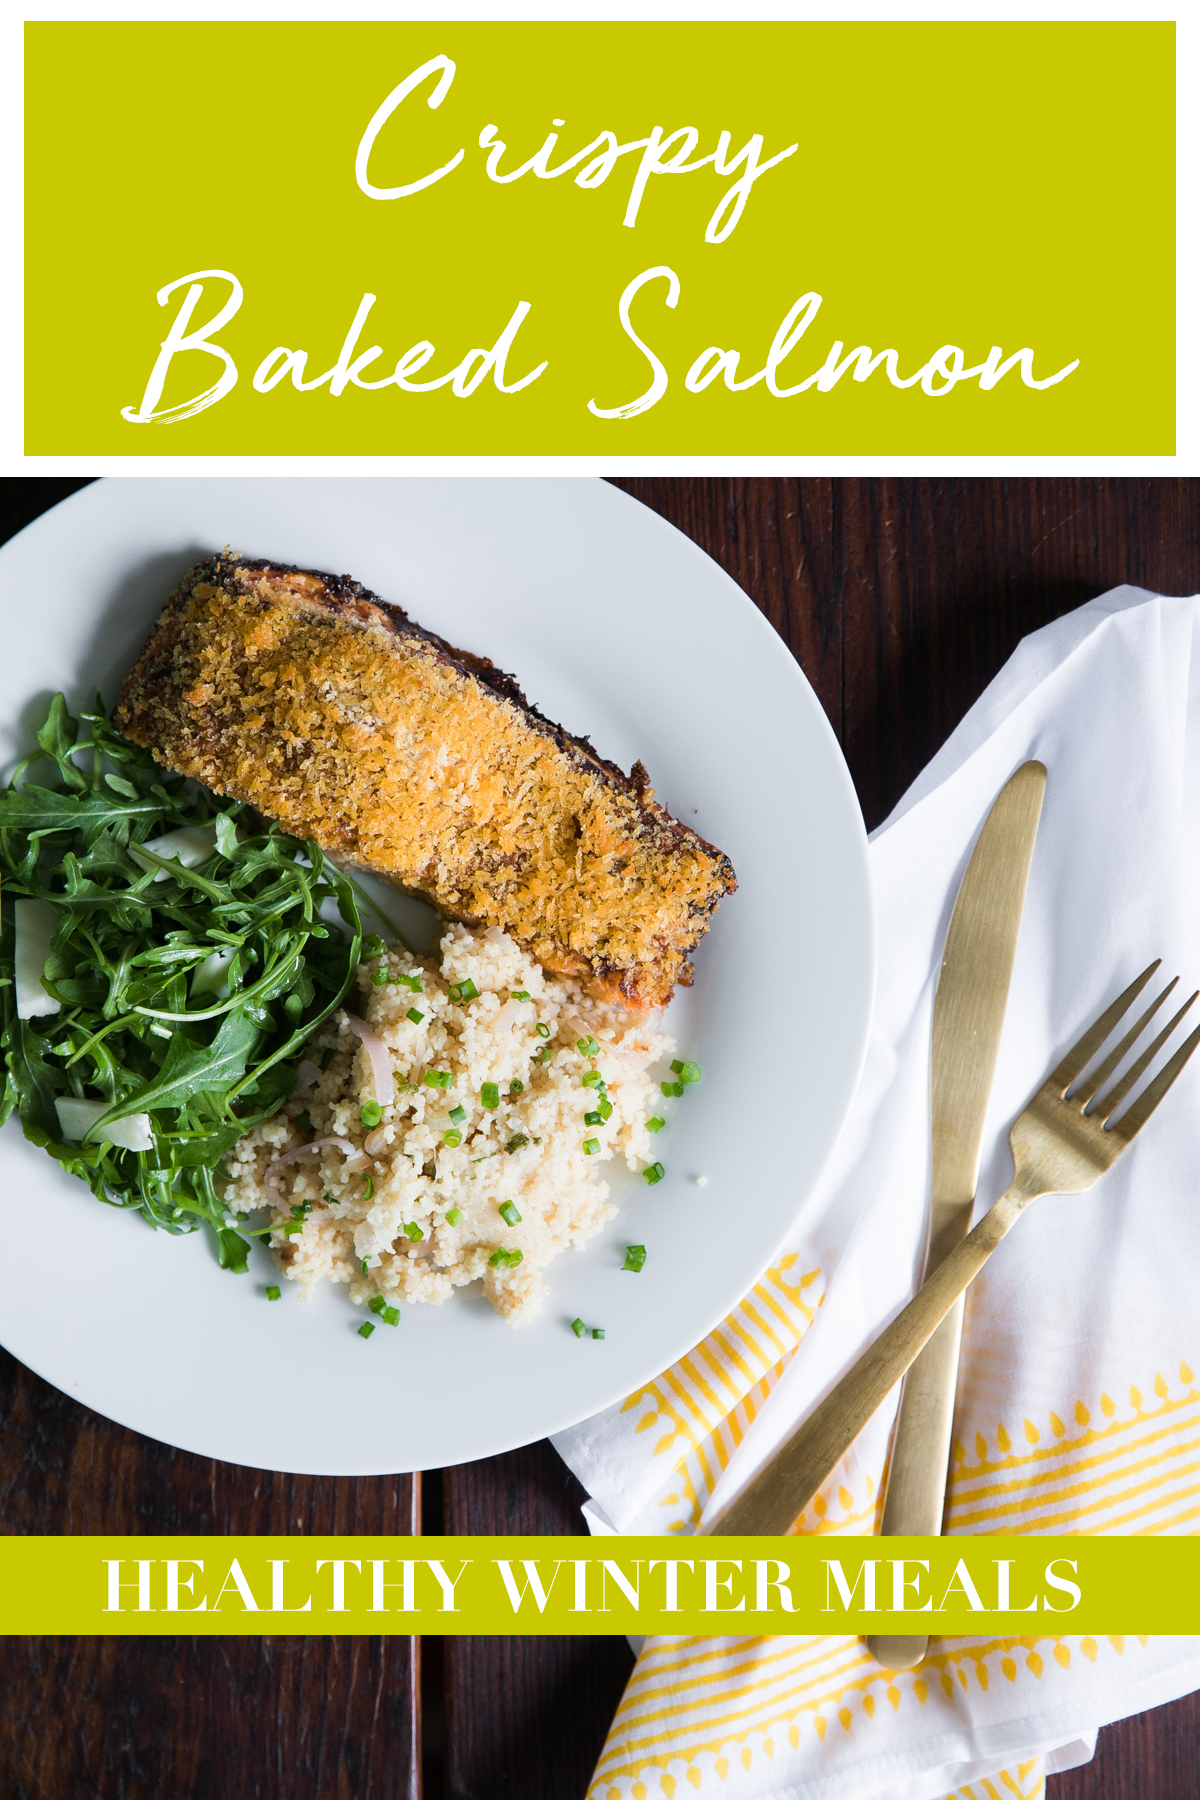 Healthy Winter Meals | Crispy Baked Salmon | Salmon Recipes | Quick Healthy Meals | Baked Salmon Recipe | Jessica Brigham | Magazine Ready for Life